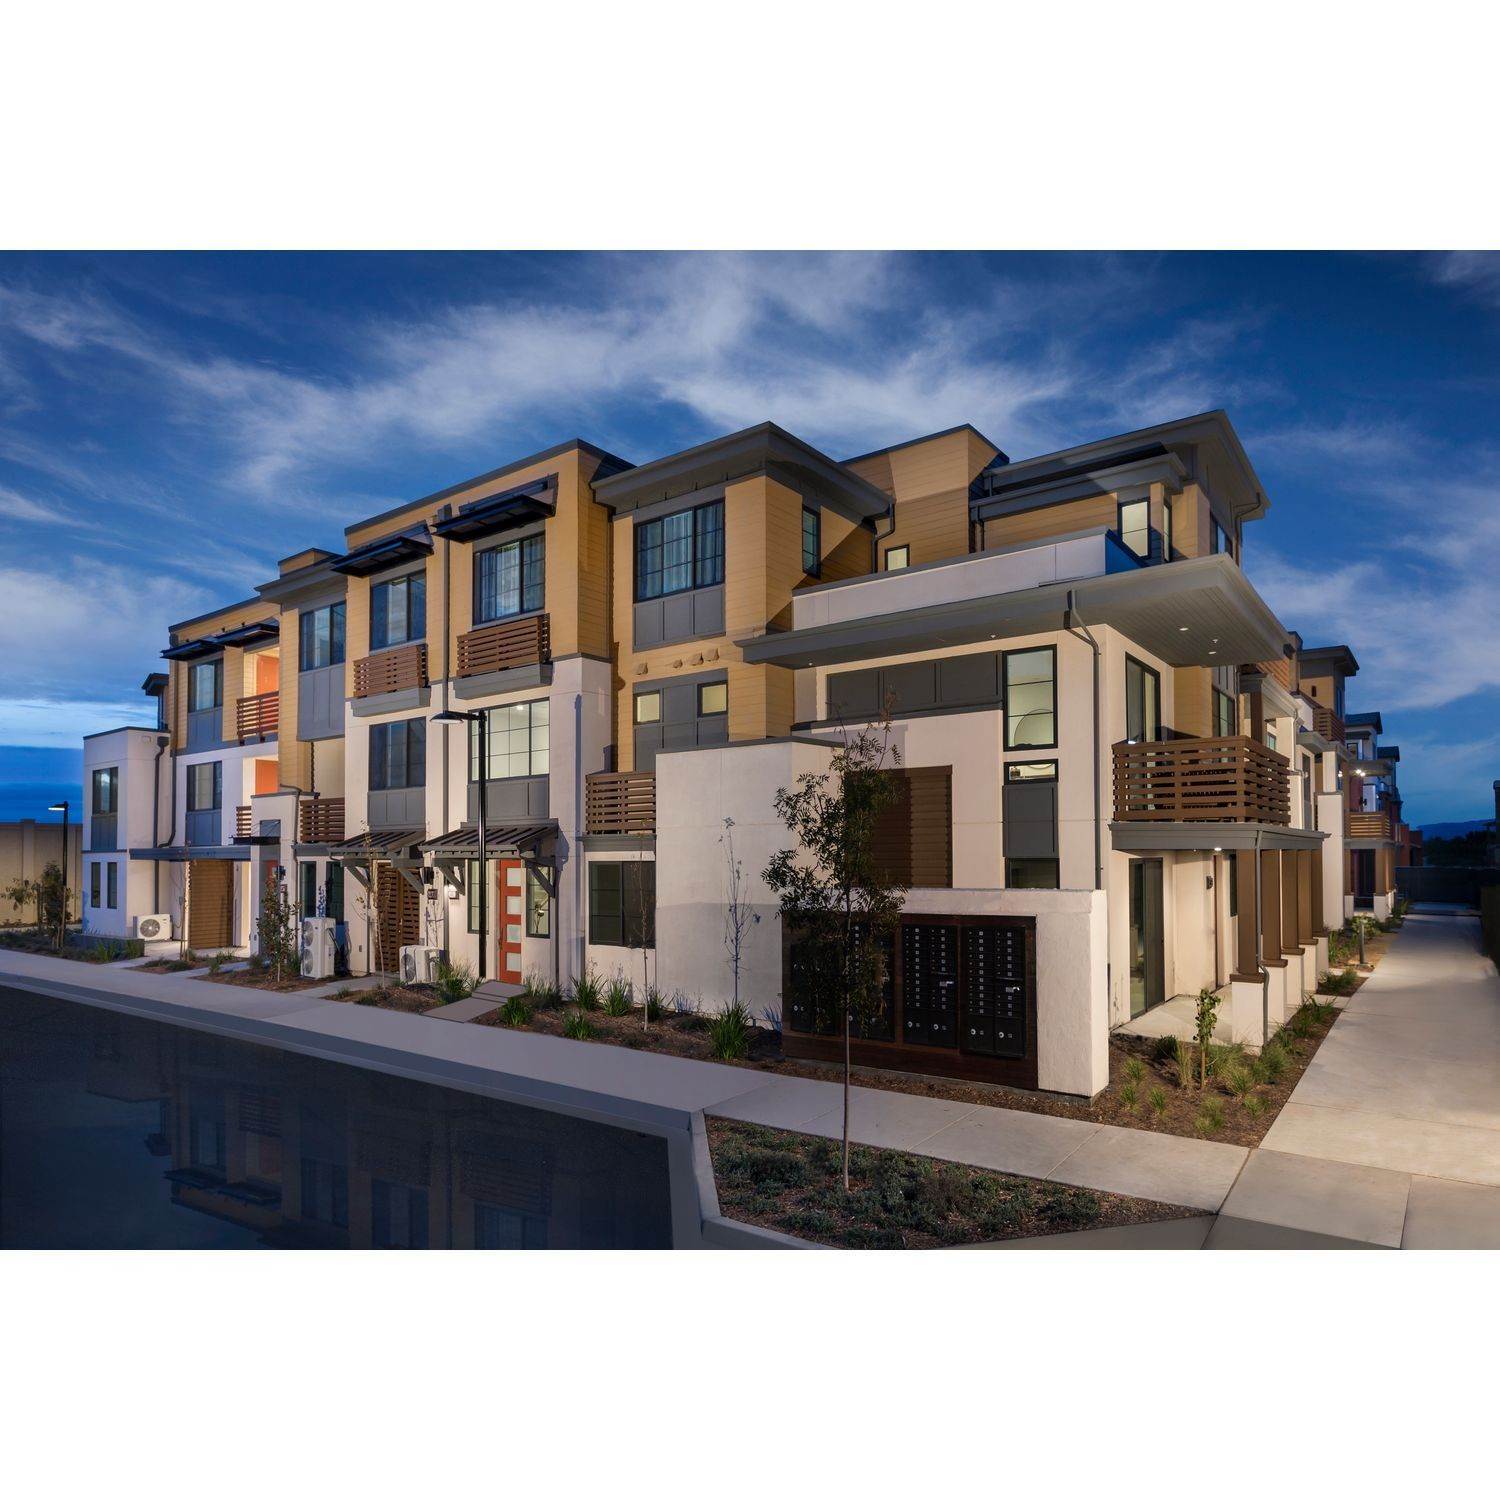 Multi Family for Sale at Bellaterra - The Flats- Plan 6 16365 Lark Ave LOS GATOS, CALIFORNIA 95032 UNITED STATES